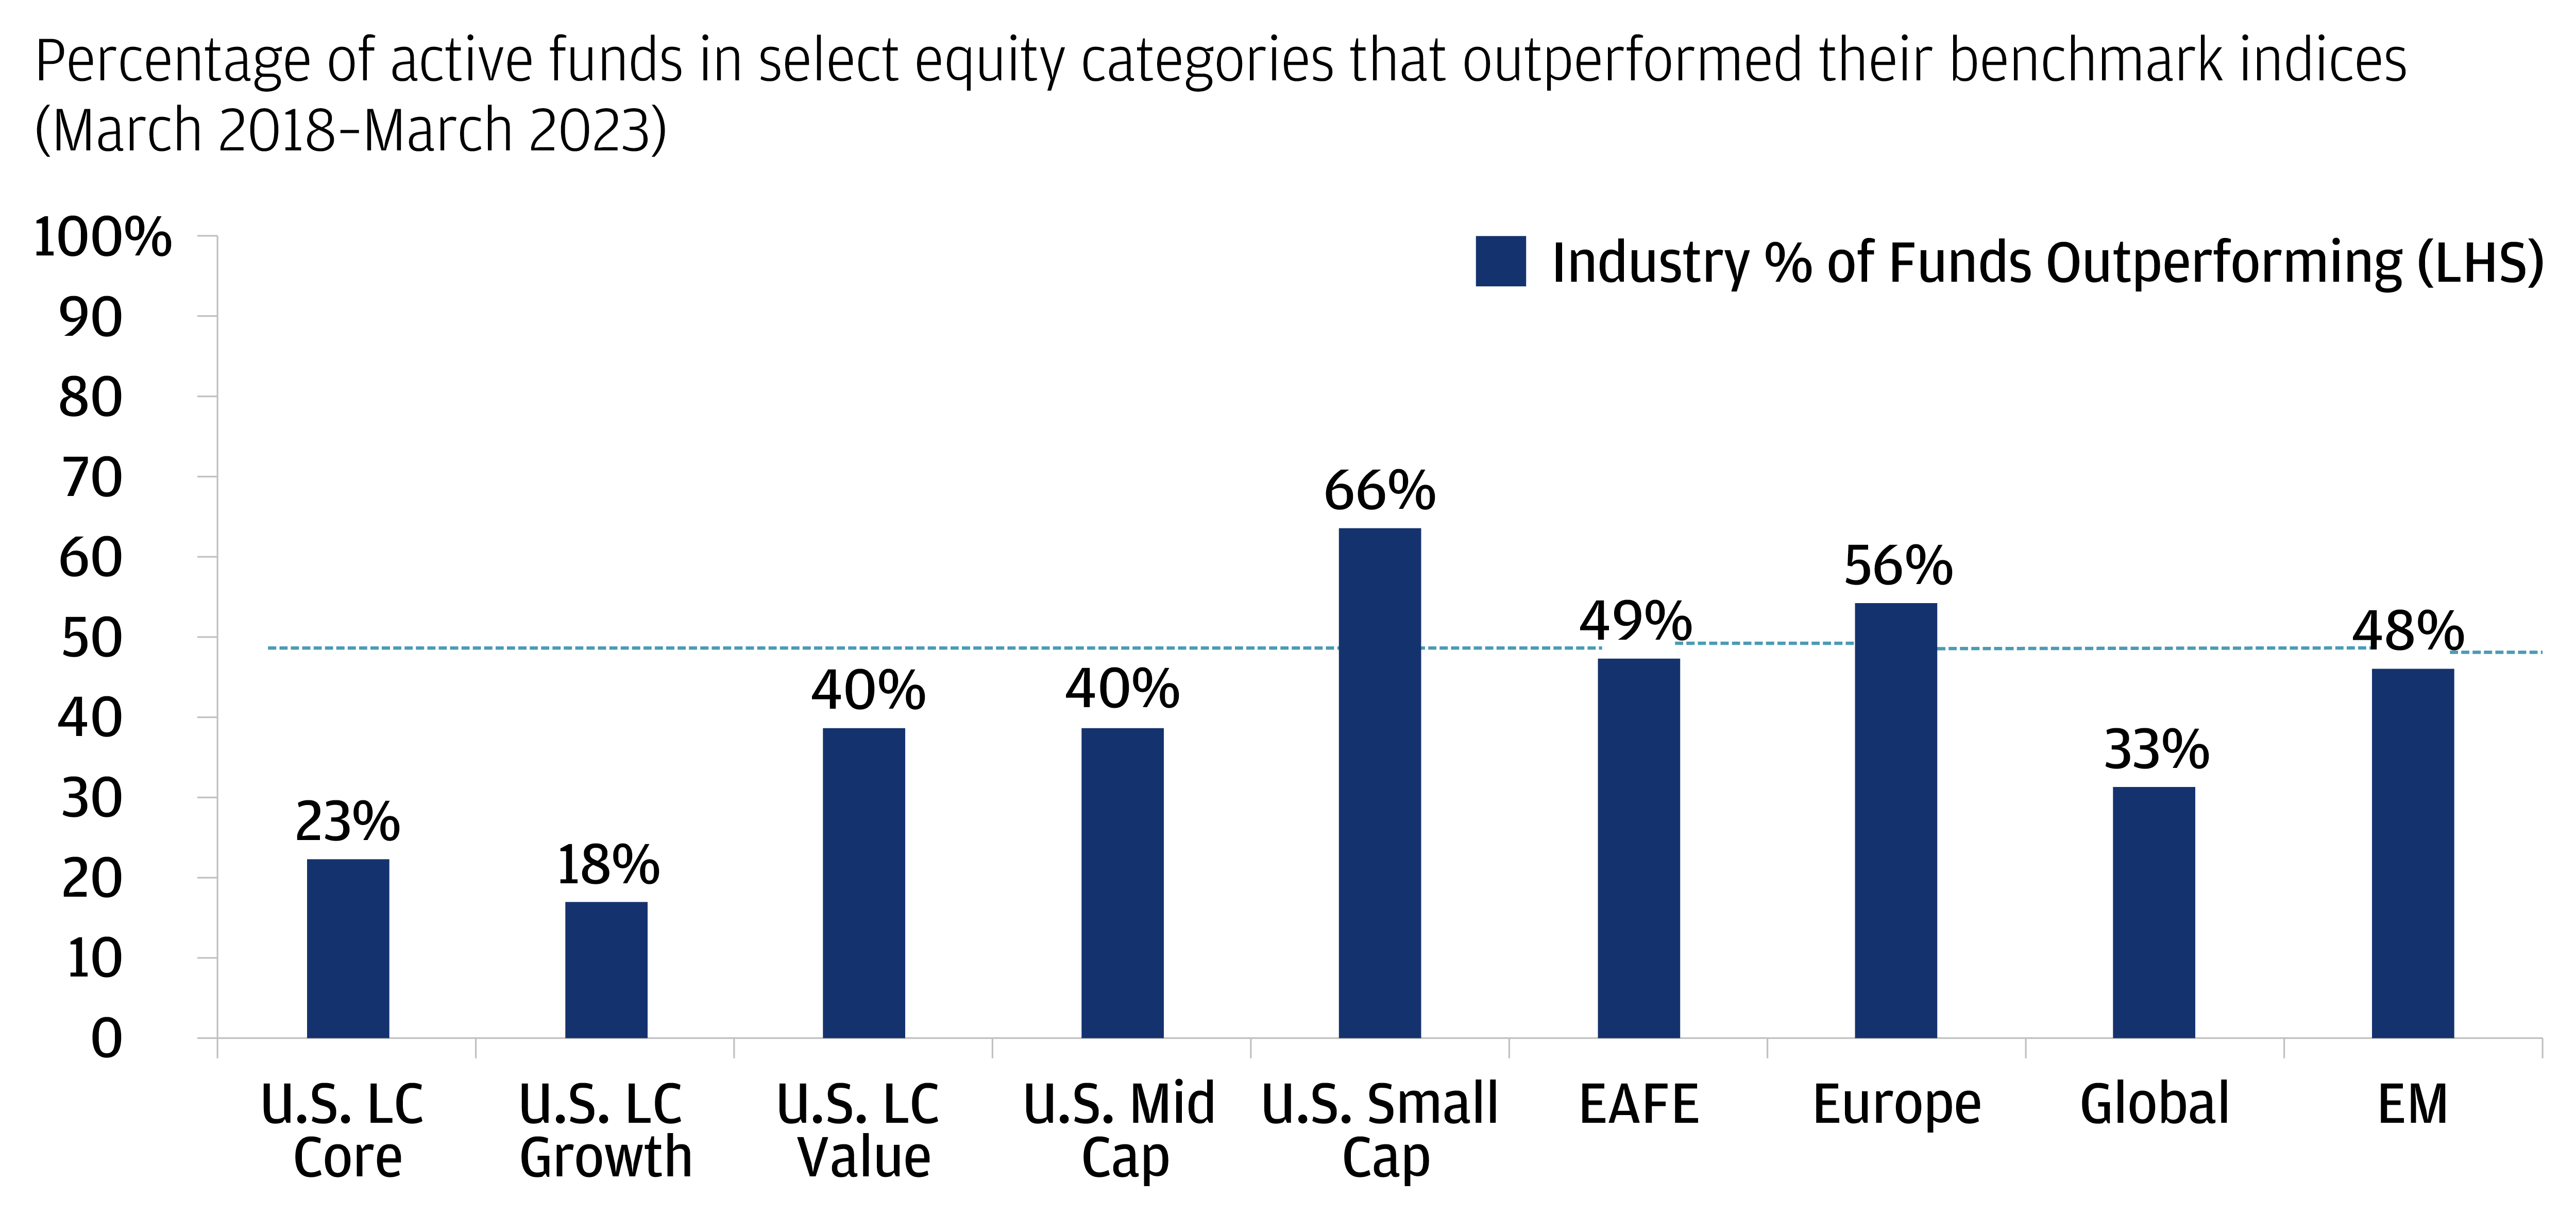 The illustration depicts analyst coverage, dispersion, index concentration, 5 year industry manger outperformance, and 5 year industry median outperformance in US small cap, Europe, and Emerging market asset classes and compares it to the US large cap asset class.